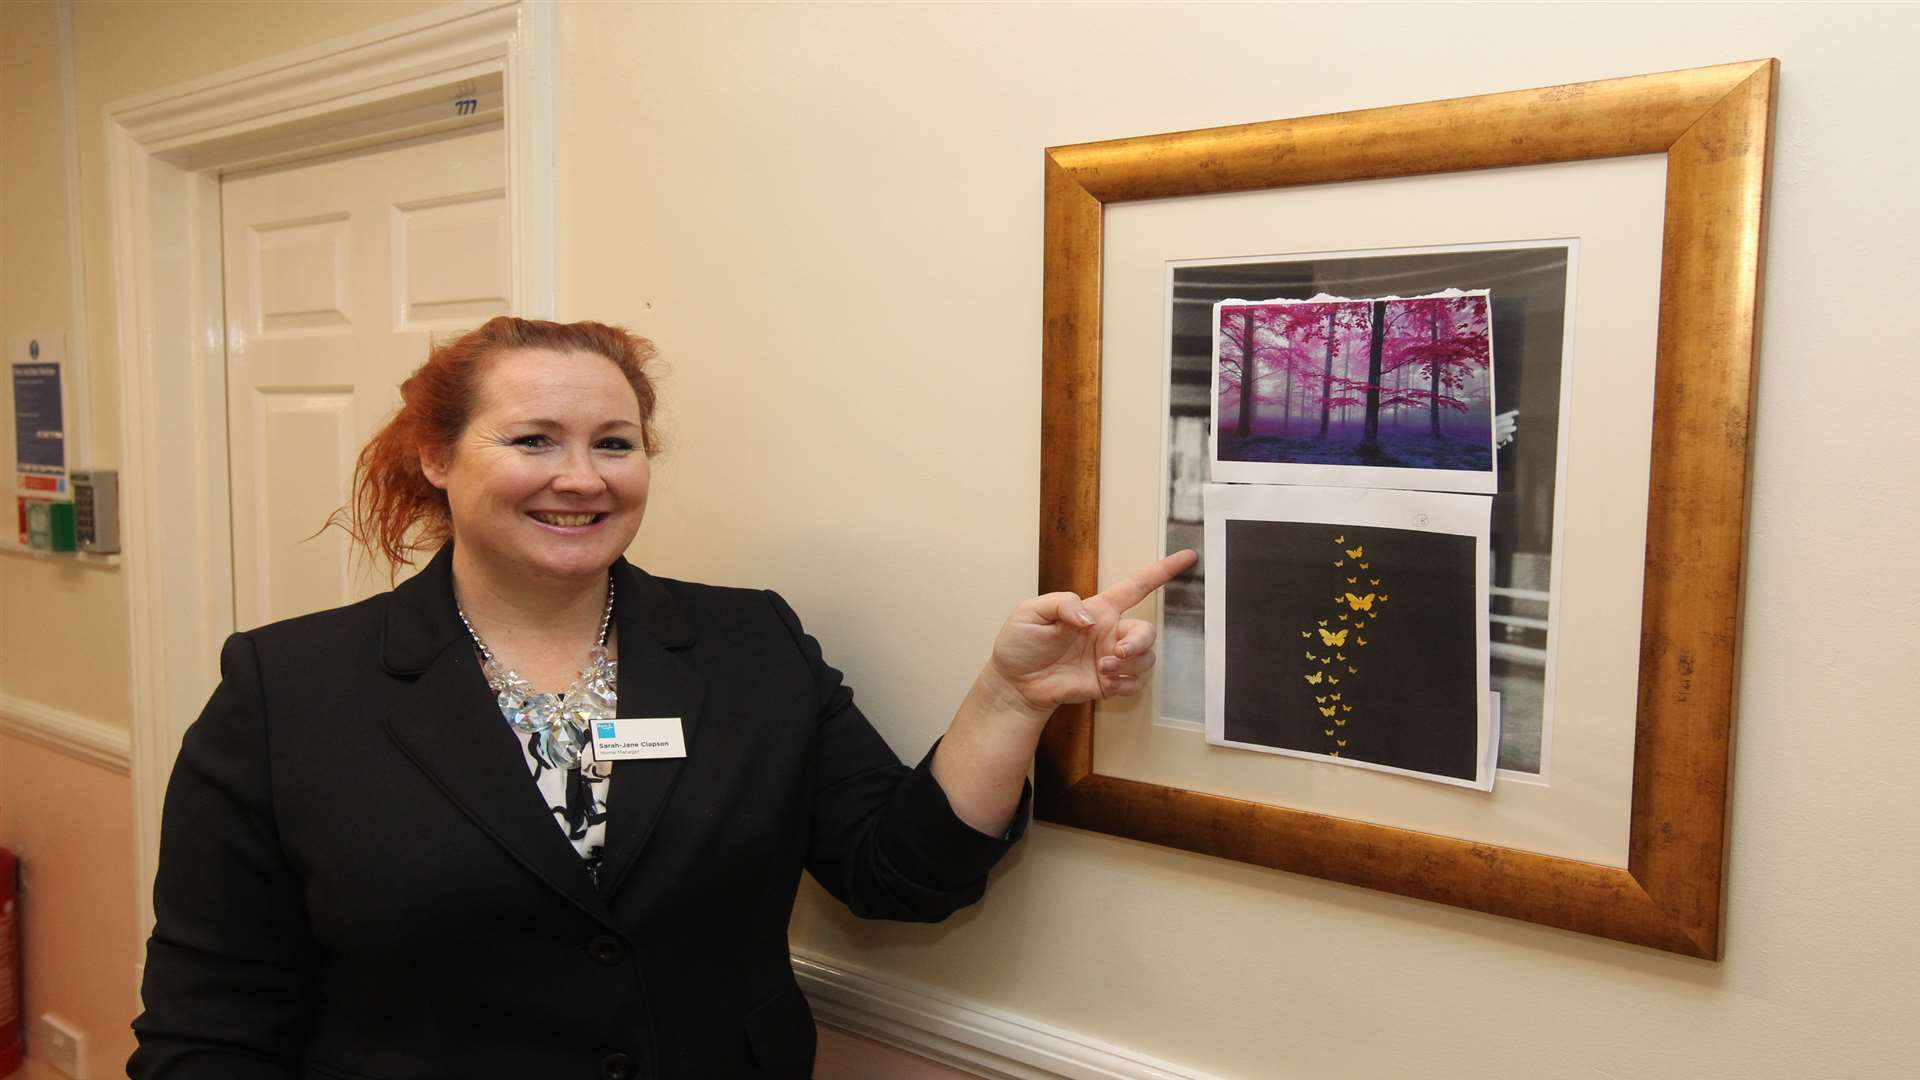 Sarah-Jane Clapson, MBA, Home Manager has pictures she has printed out showing future changes to the nursing home.